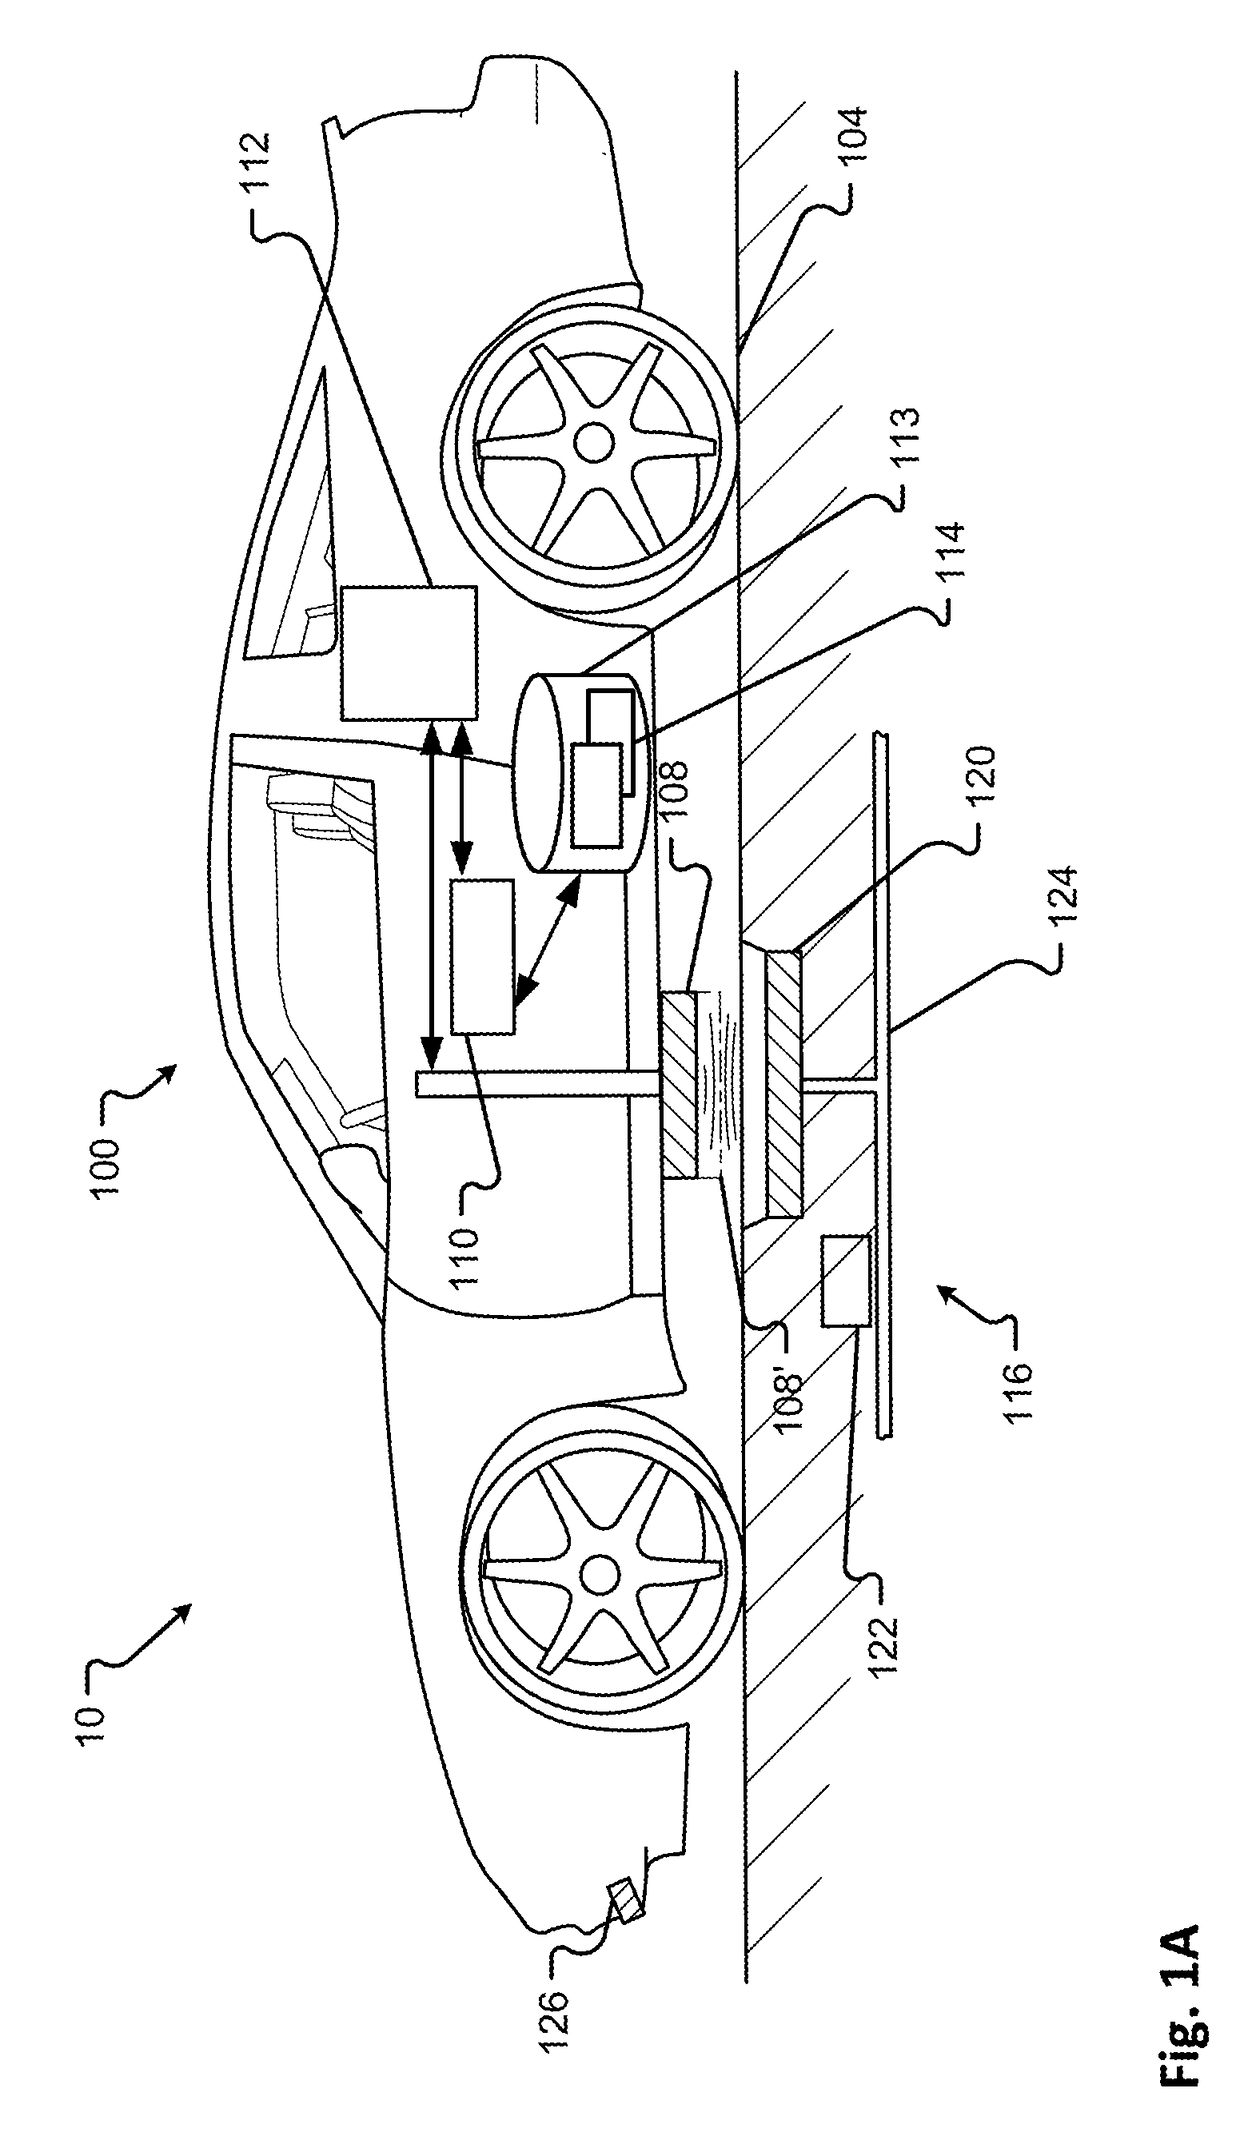 Electric vehicle charging device obstacle avoidance and warning system and method of use